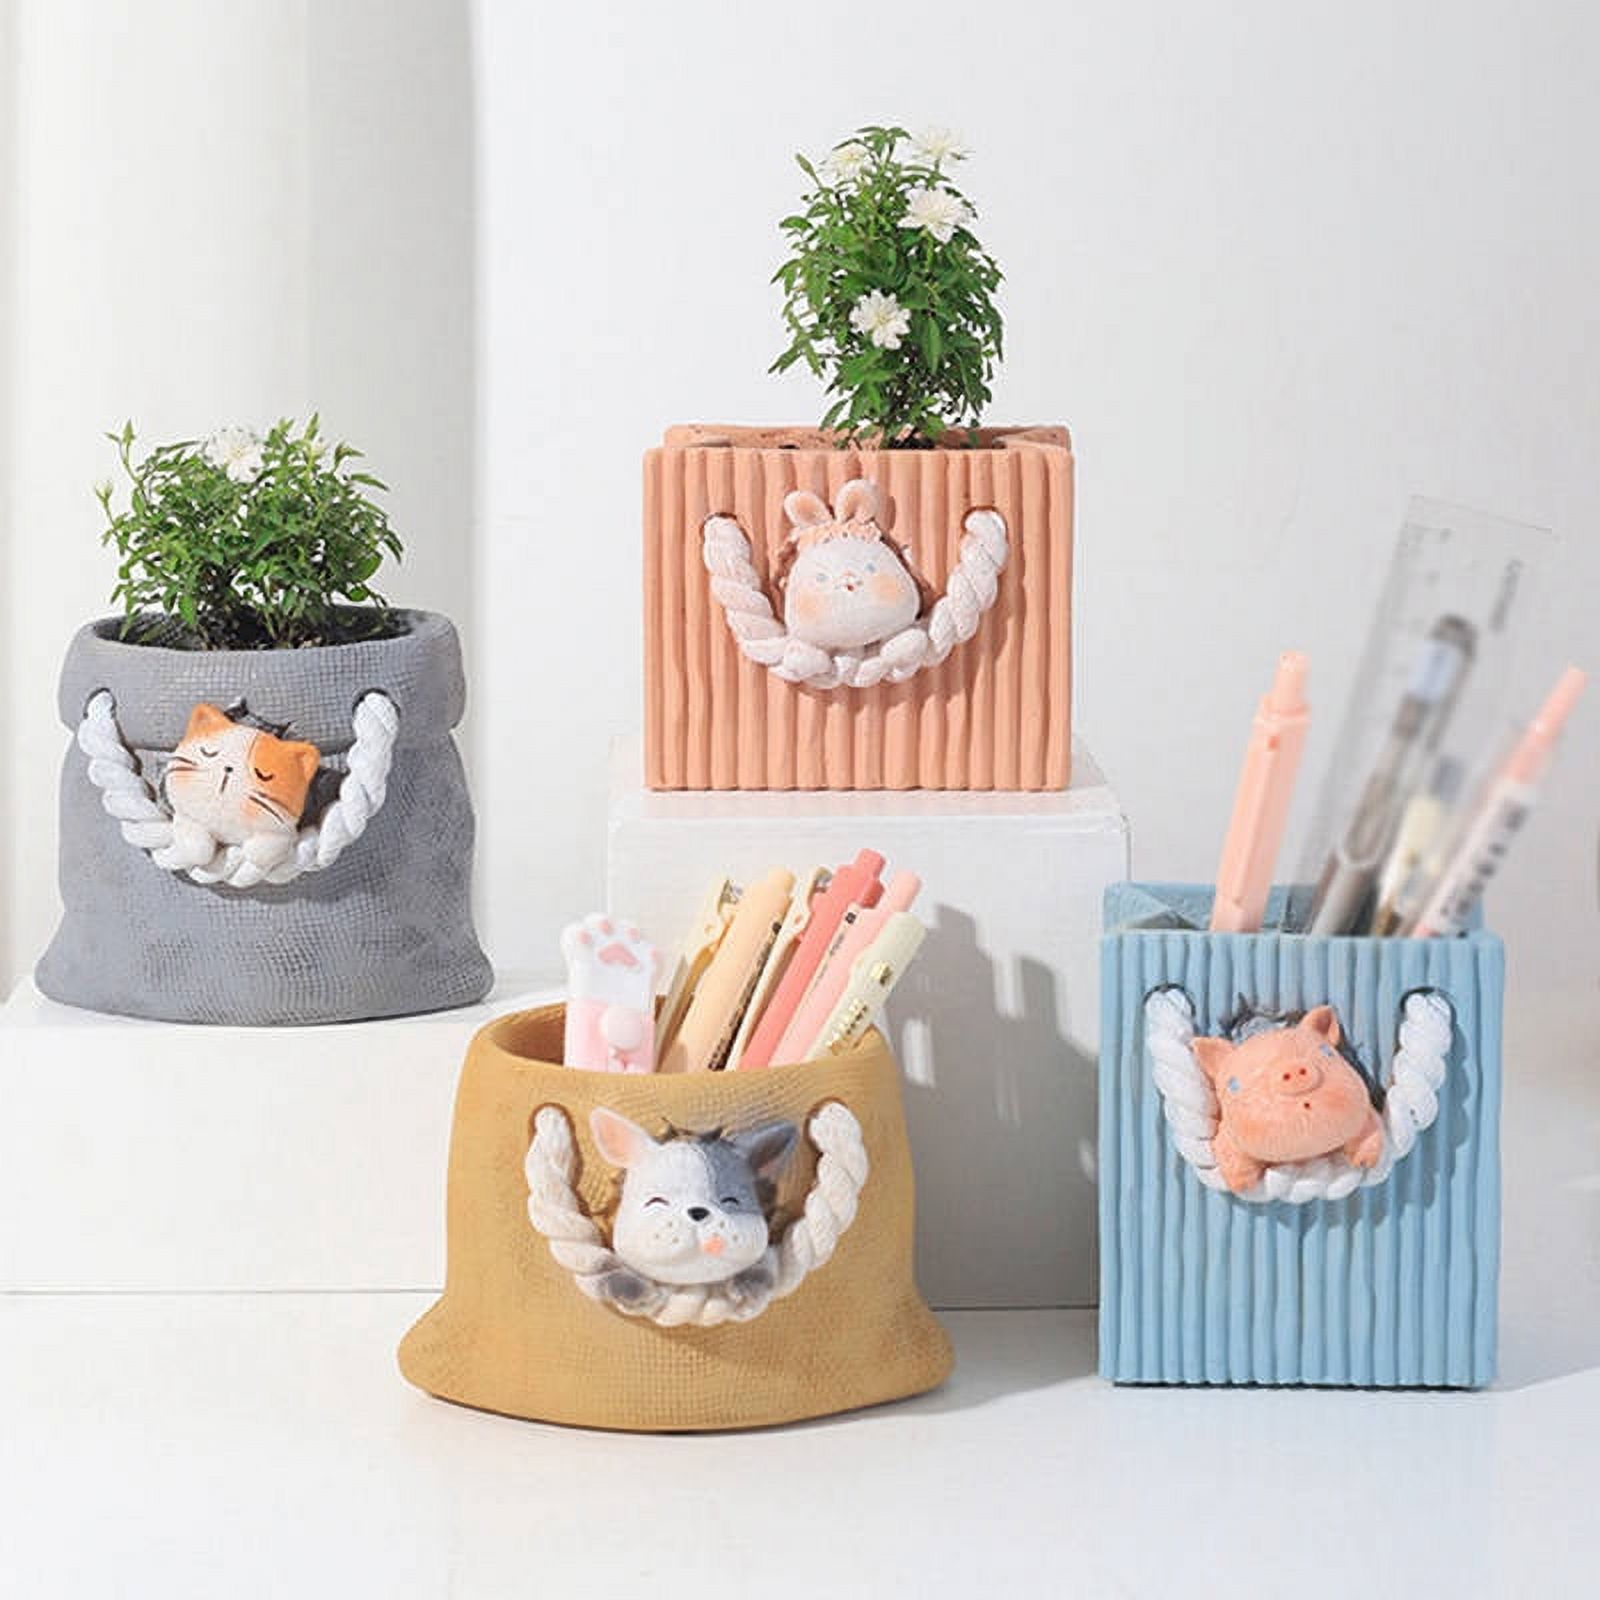 Cute Animal Plant Pots,Resin Flower Pots Outdoor Garden Planters with Drain Holes 4 inch Indoor Small Plant Pots for Family Woman Wife Mother Gift - image 1 of 6